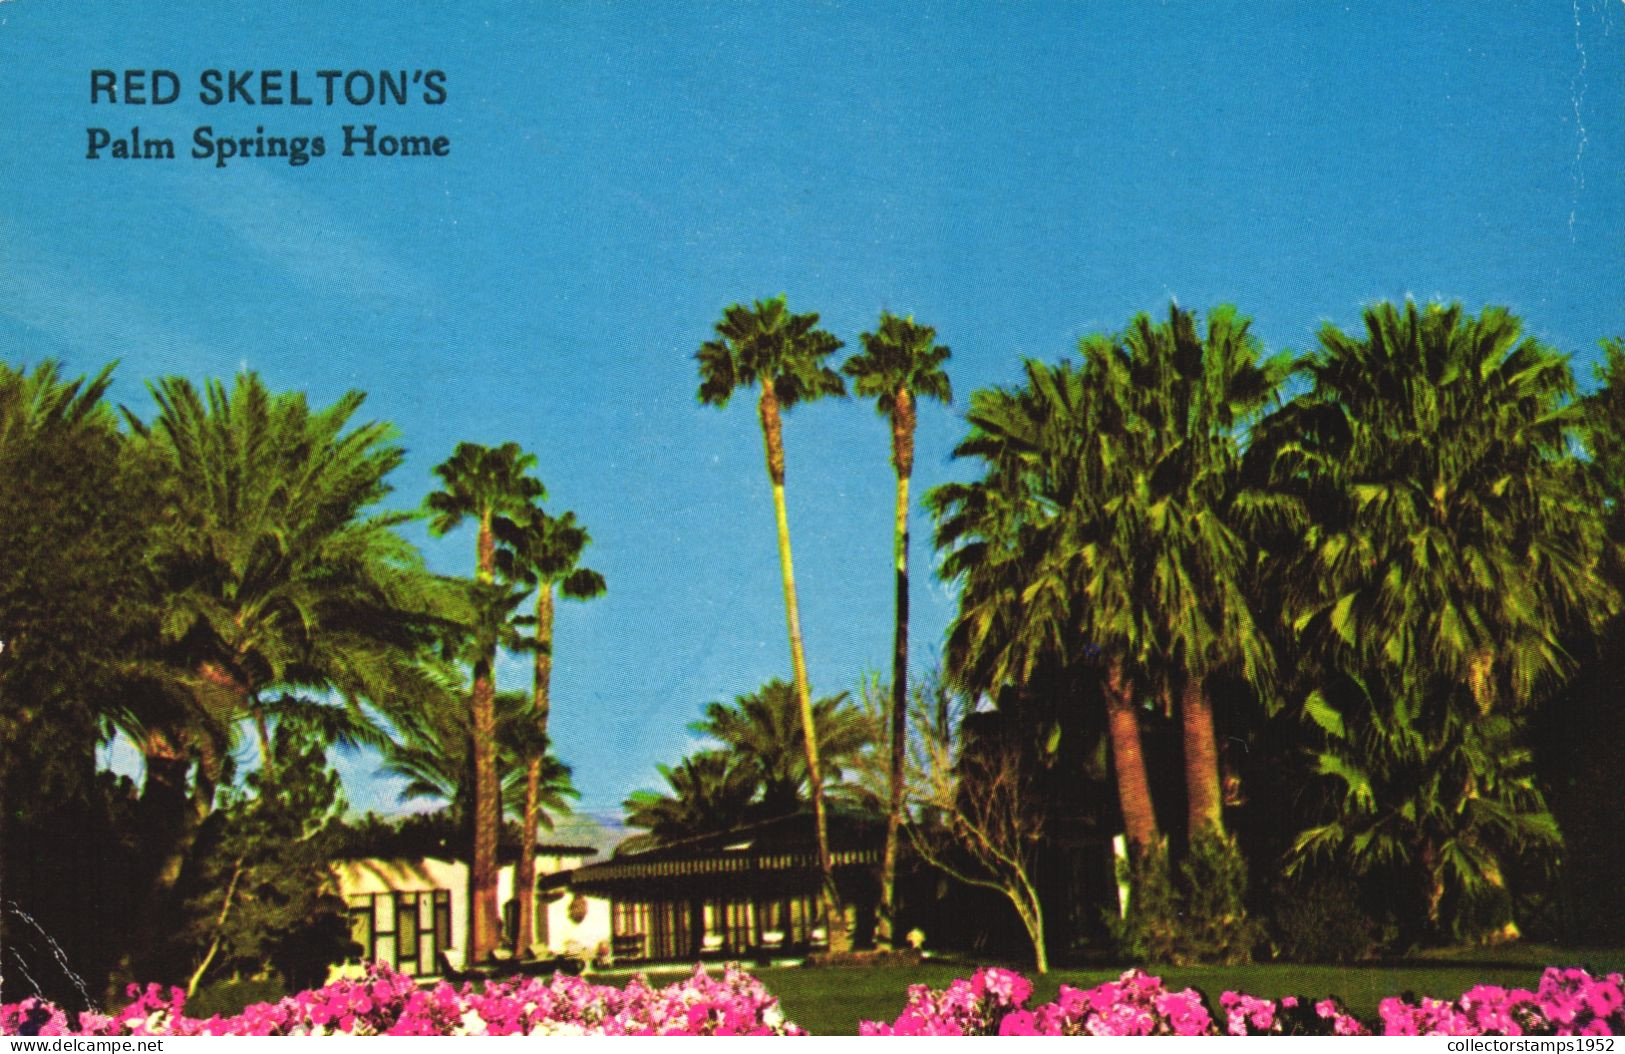 PALM SPRINGS, RED SKELTON, ENTERTAINER, ARCHITECTURE, PALM TREES, CALIFORNIA, UNITED STATES, POSTCARD - Palm Springs